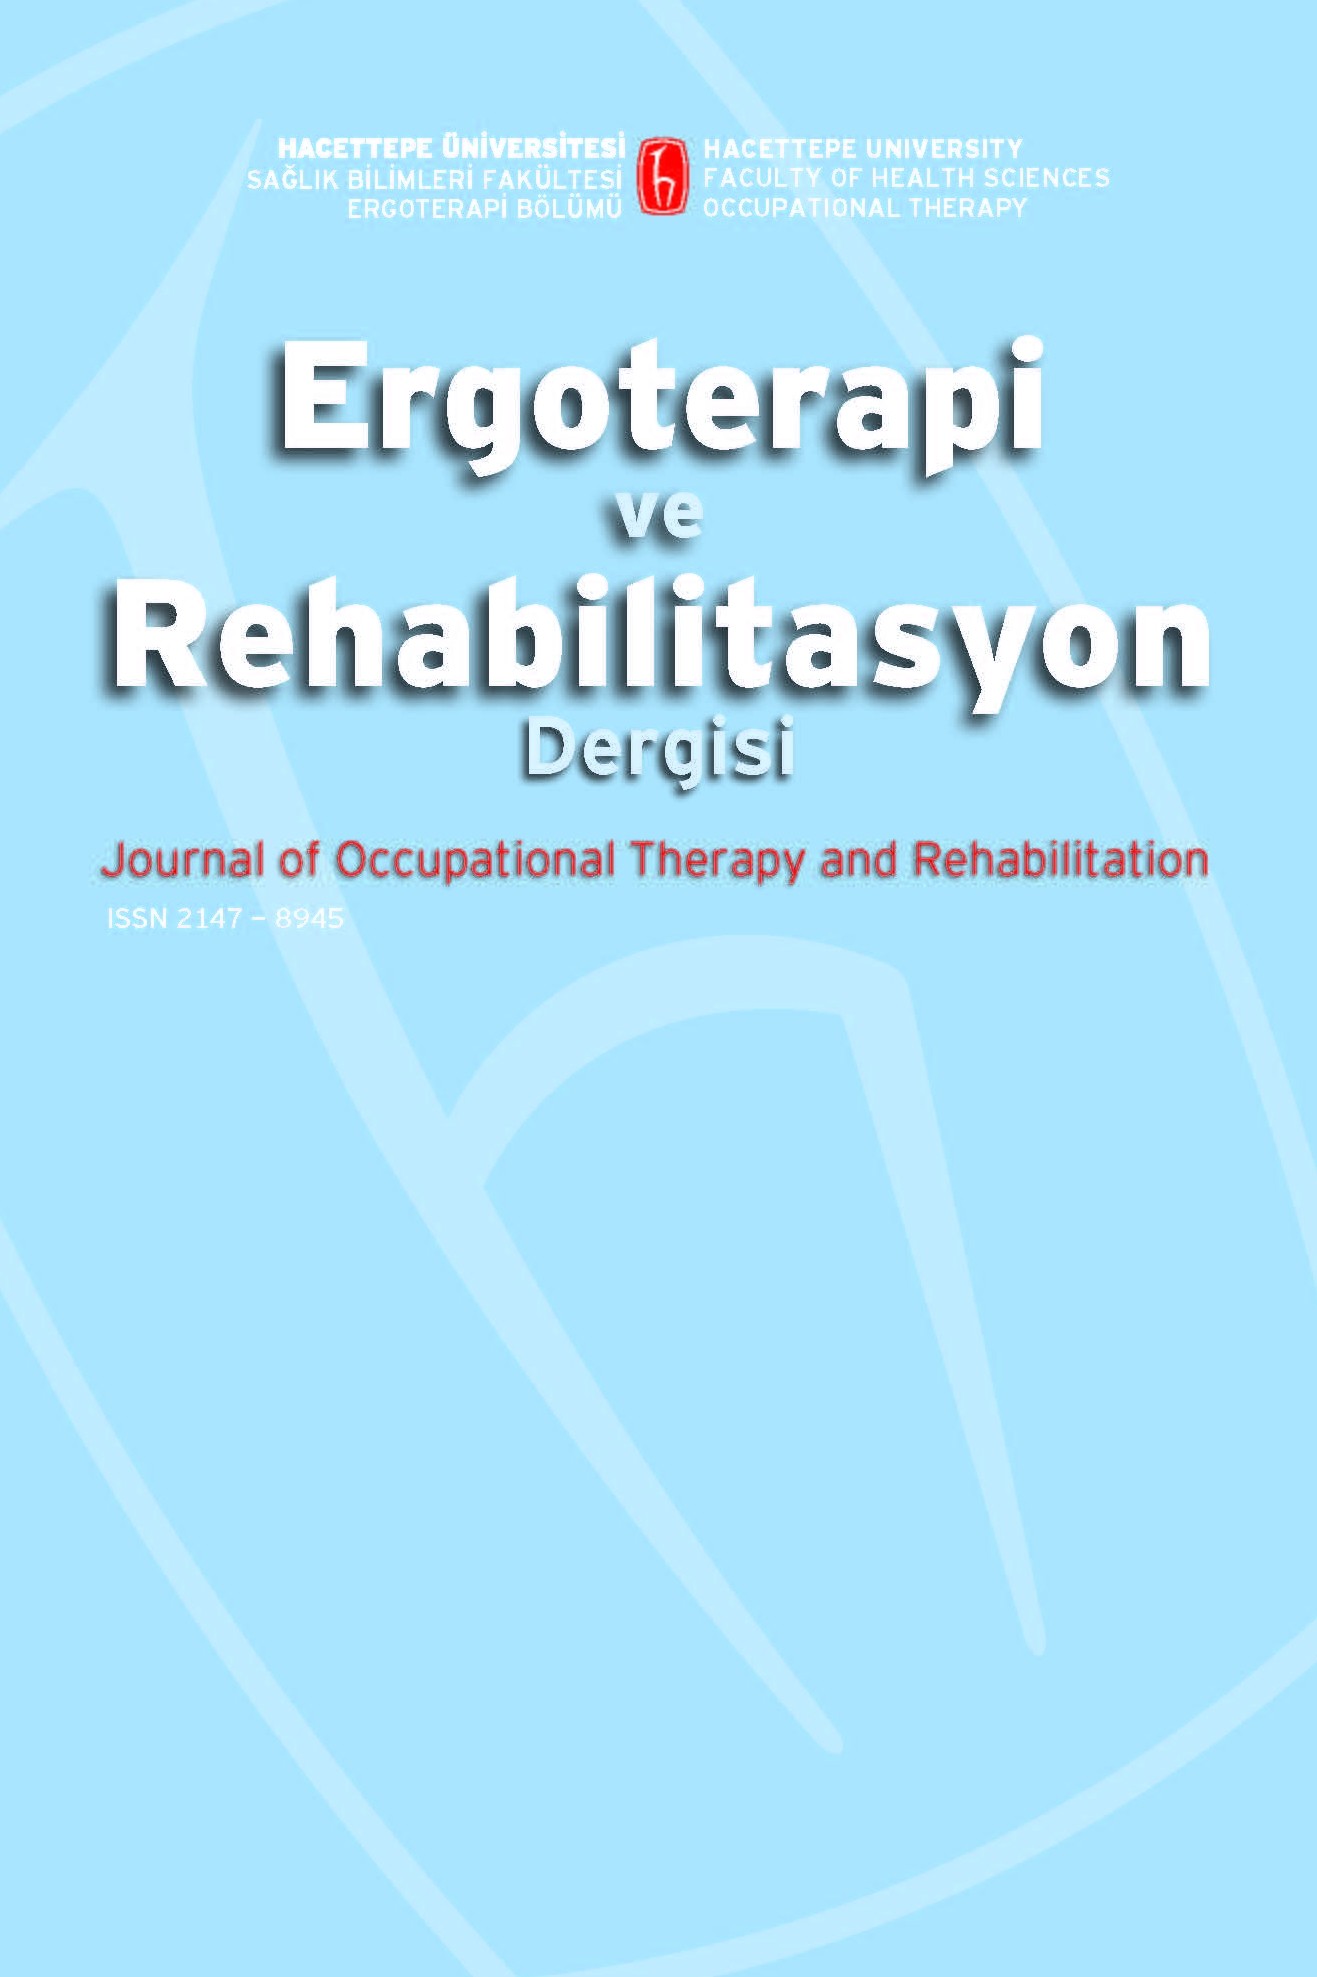 Journal of Occupational Therapy and Rehabilitation